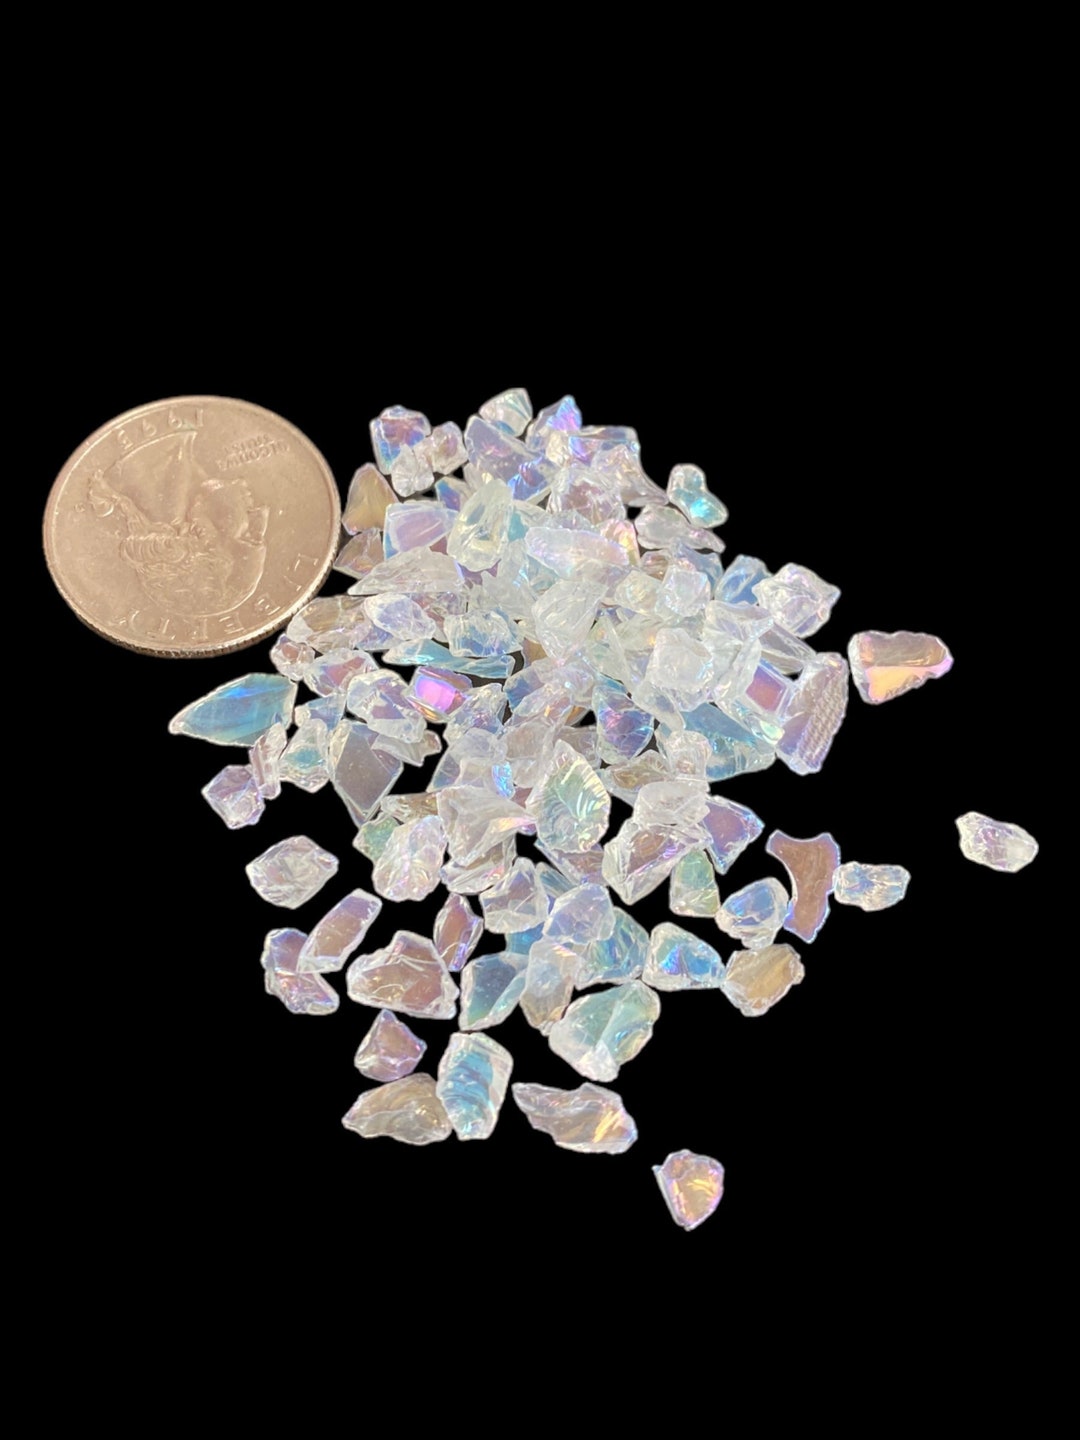 Clear Iridescent Gem Glass Chips, Broken Glass Crystals by Pound, Ice ...